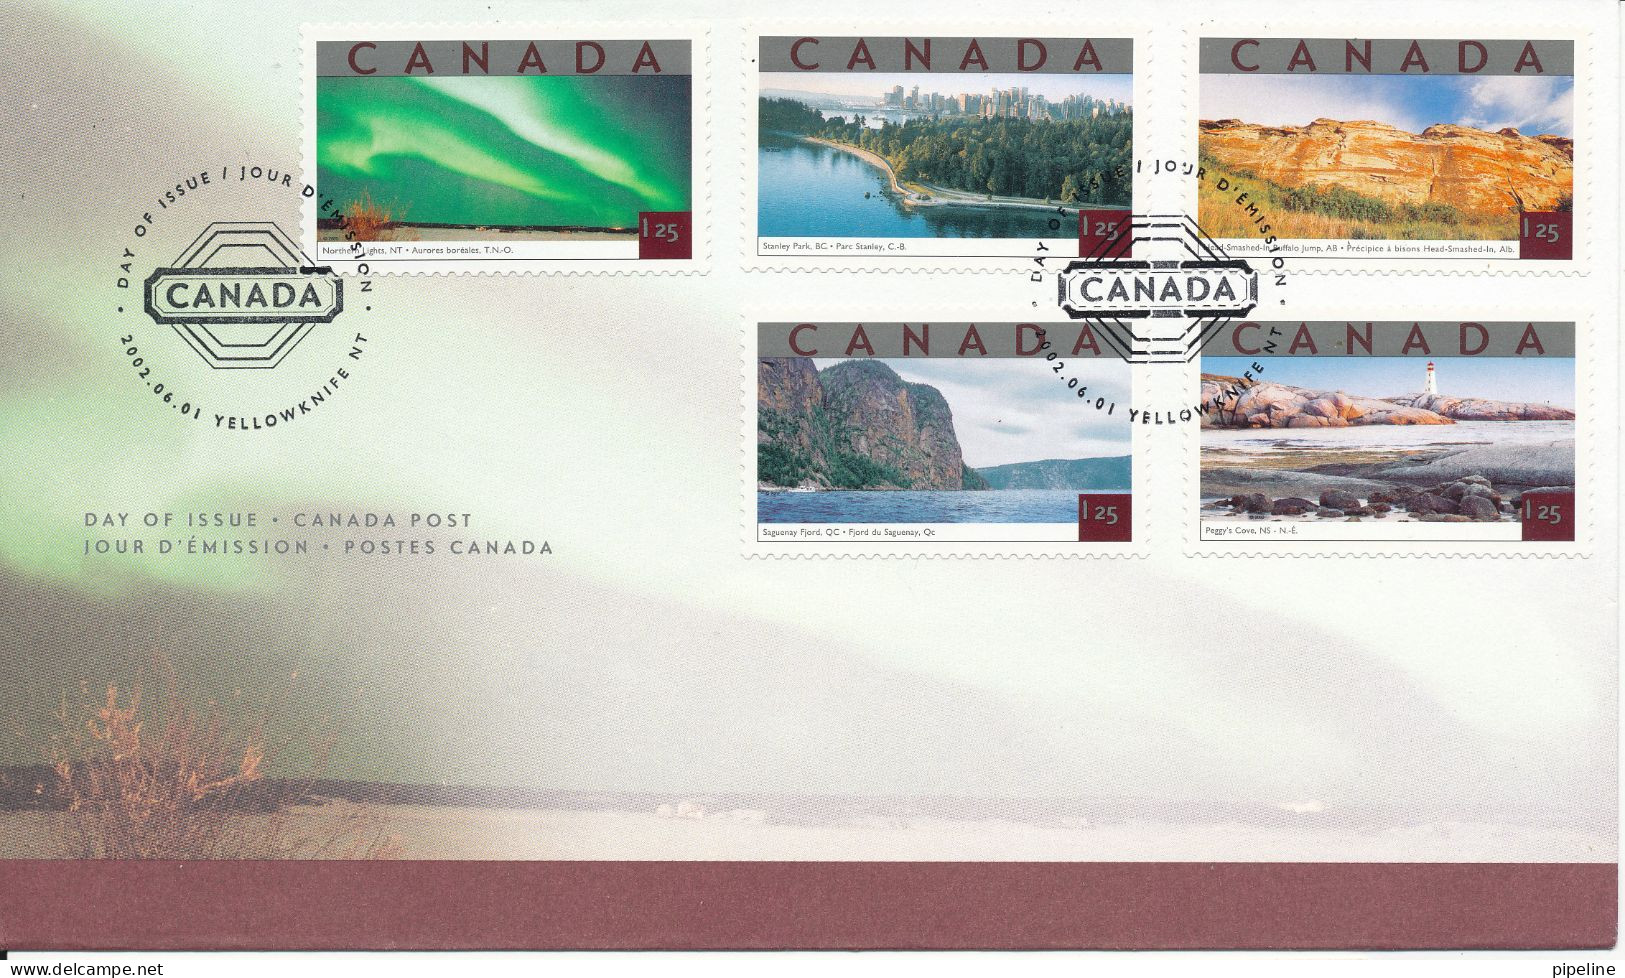 Canada FDC 1-6-2002 Tourist Attractions Northern Lights, Stanley Park, Buffalo Jump, Saguenay Fjord, Peggys Cove 5x1.25$ - 2001-2010